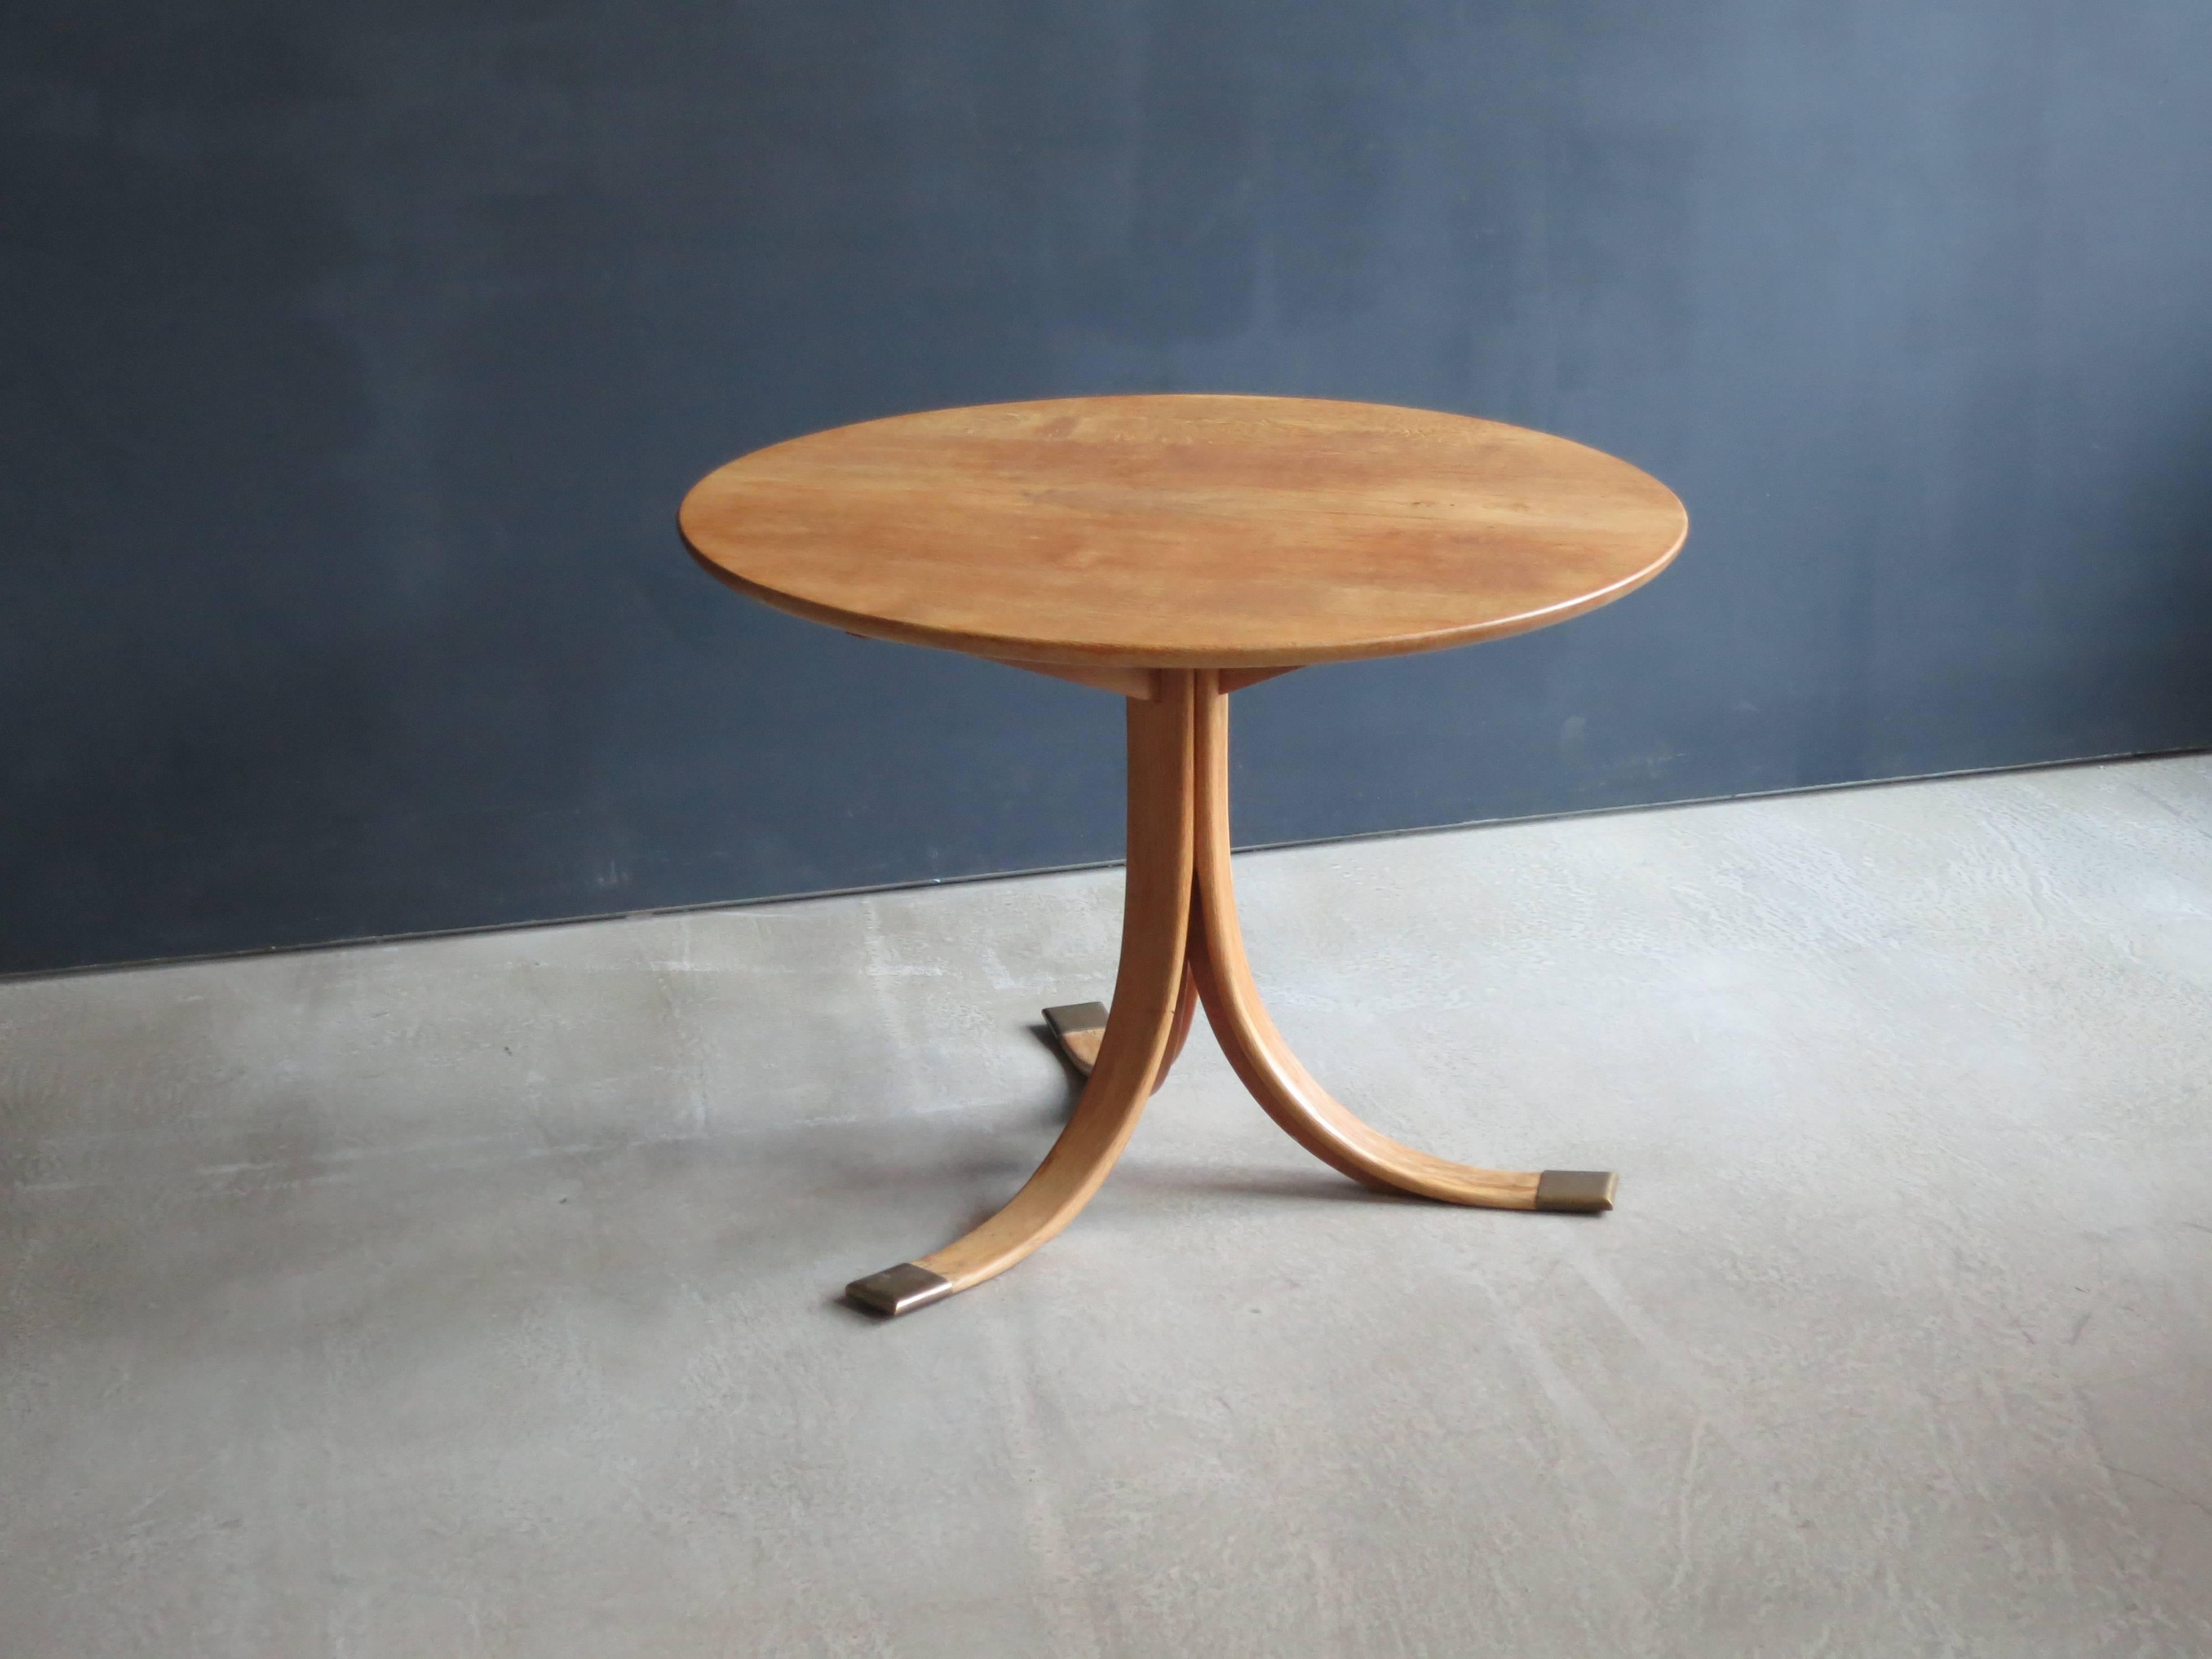 Modern in its spare simplicity, this beautifully constructed table is made of solid figured oak with patinated brass feet. It could be used as a side table for a furniture grouping or next to a bed, or as an occasional table.